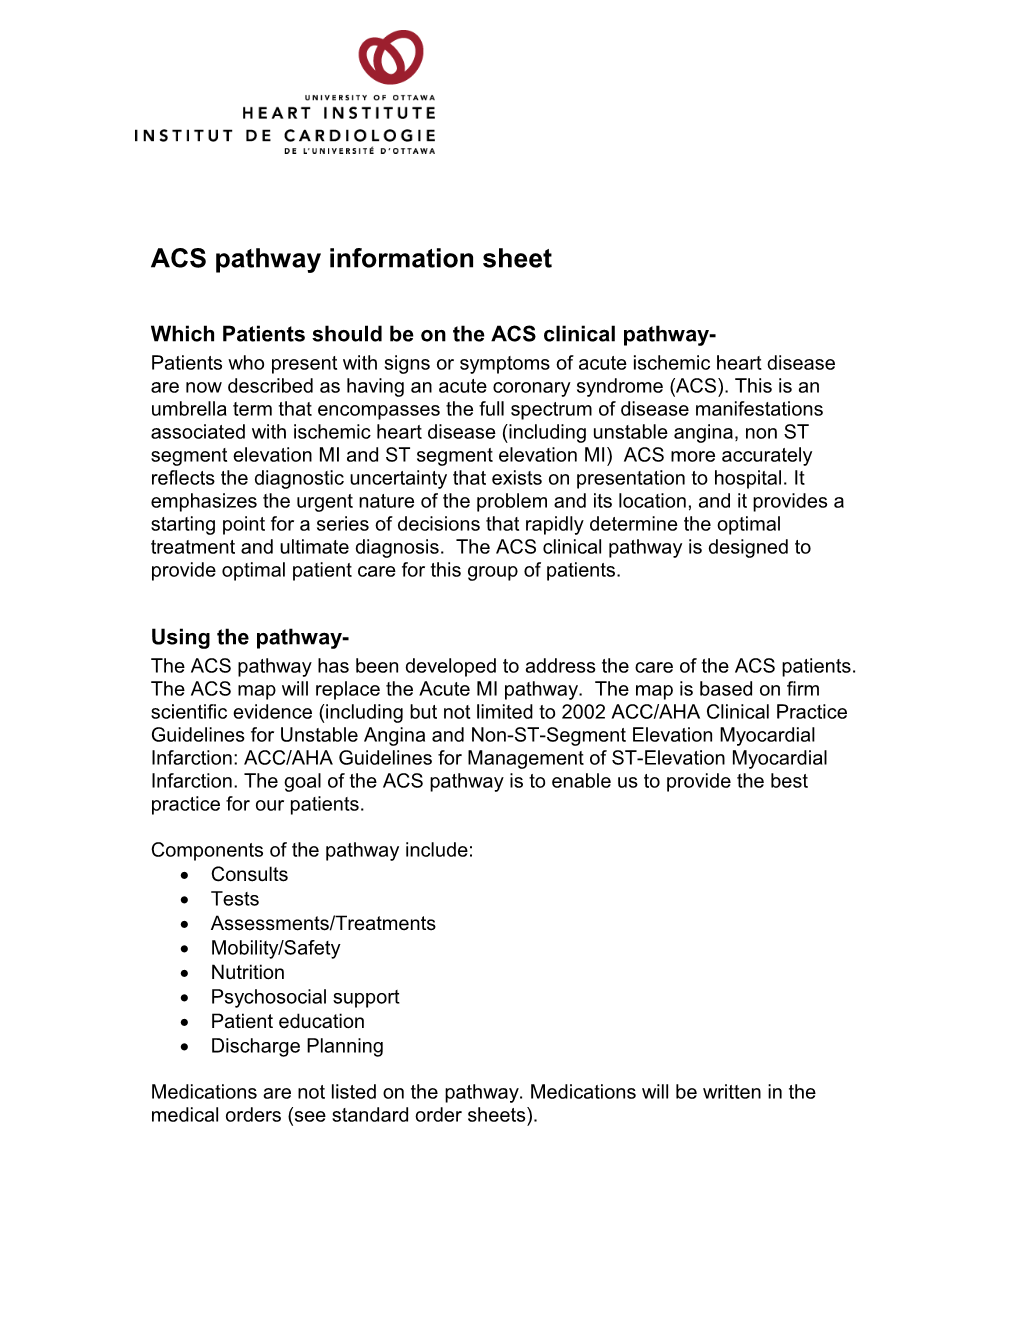 Which Patients Should Be on the ACS Clinical Pathway